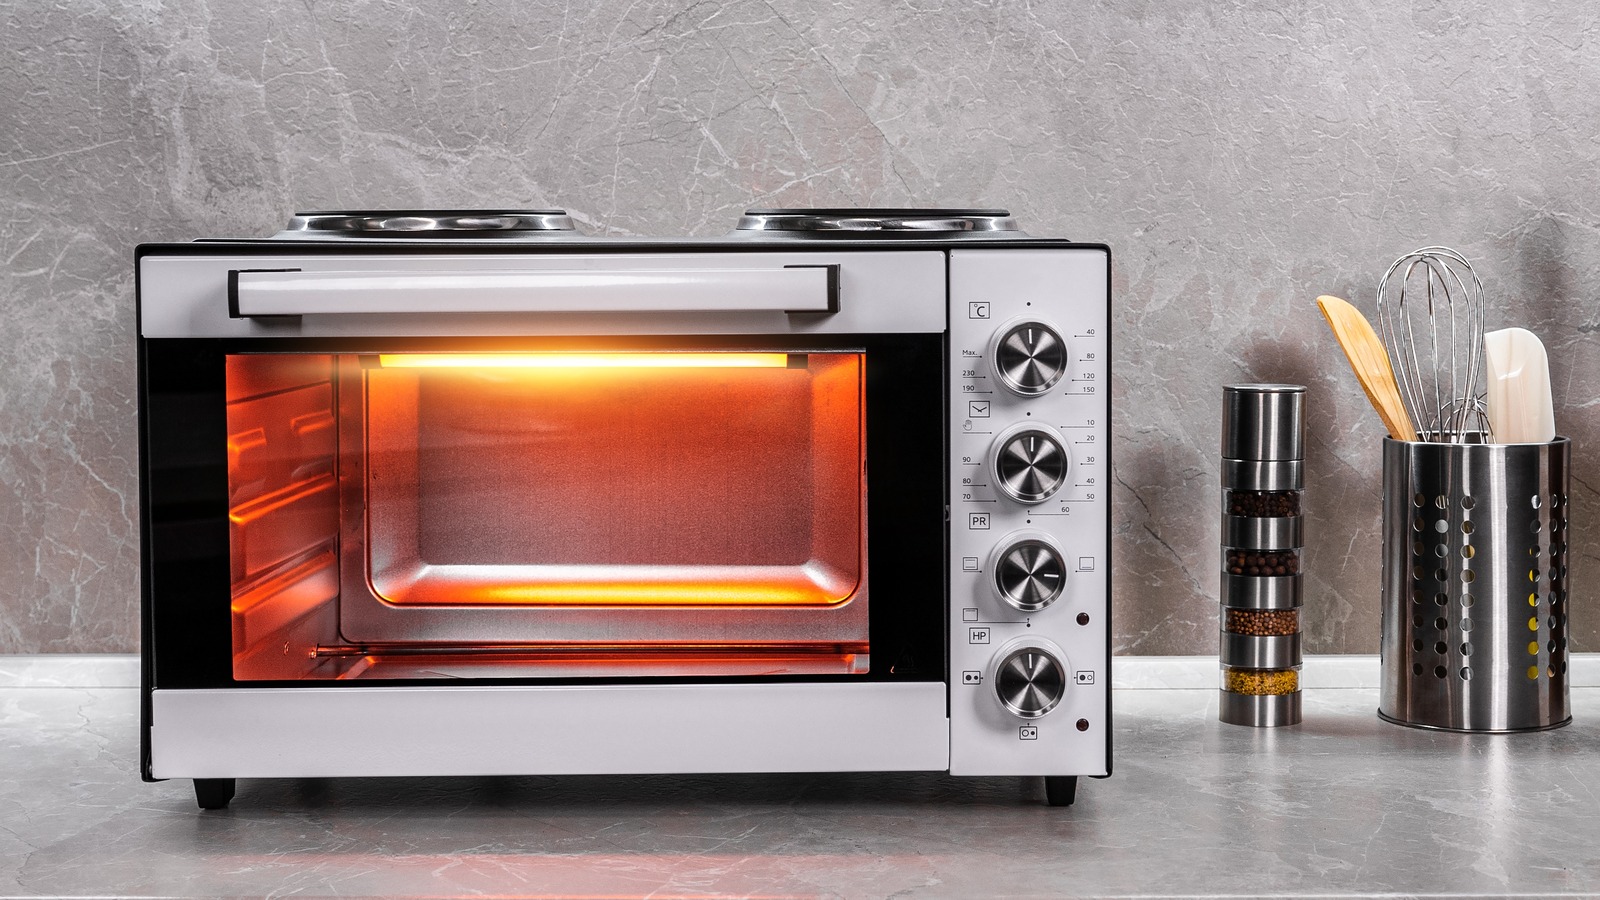 Yes, it is a toaster toaster oven - CNET